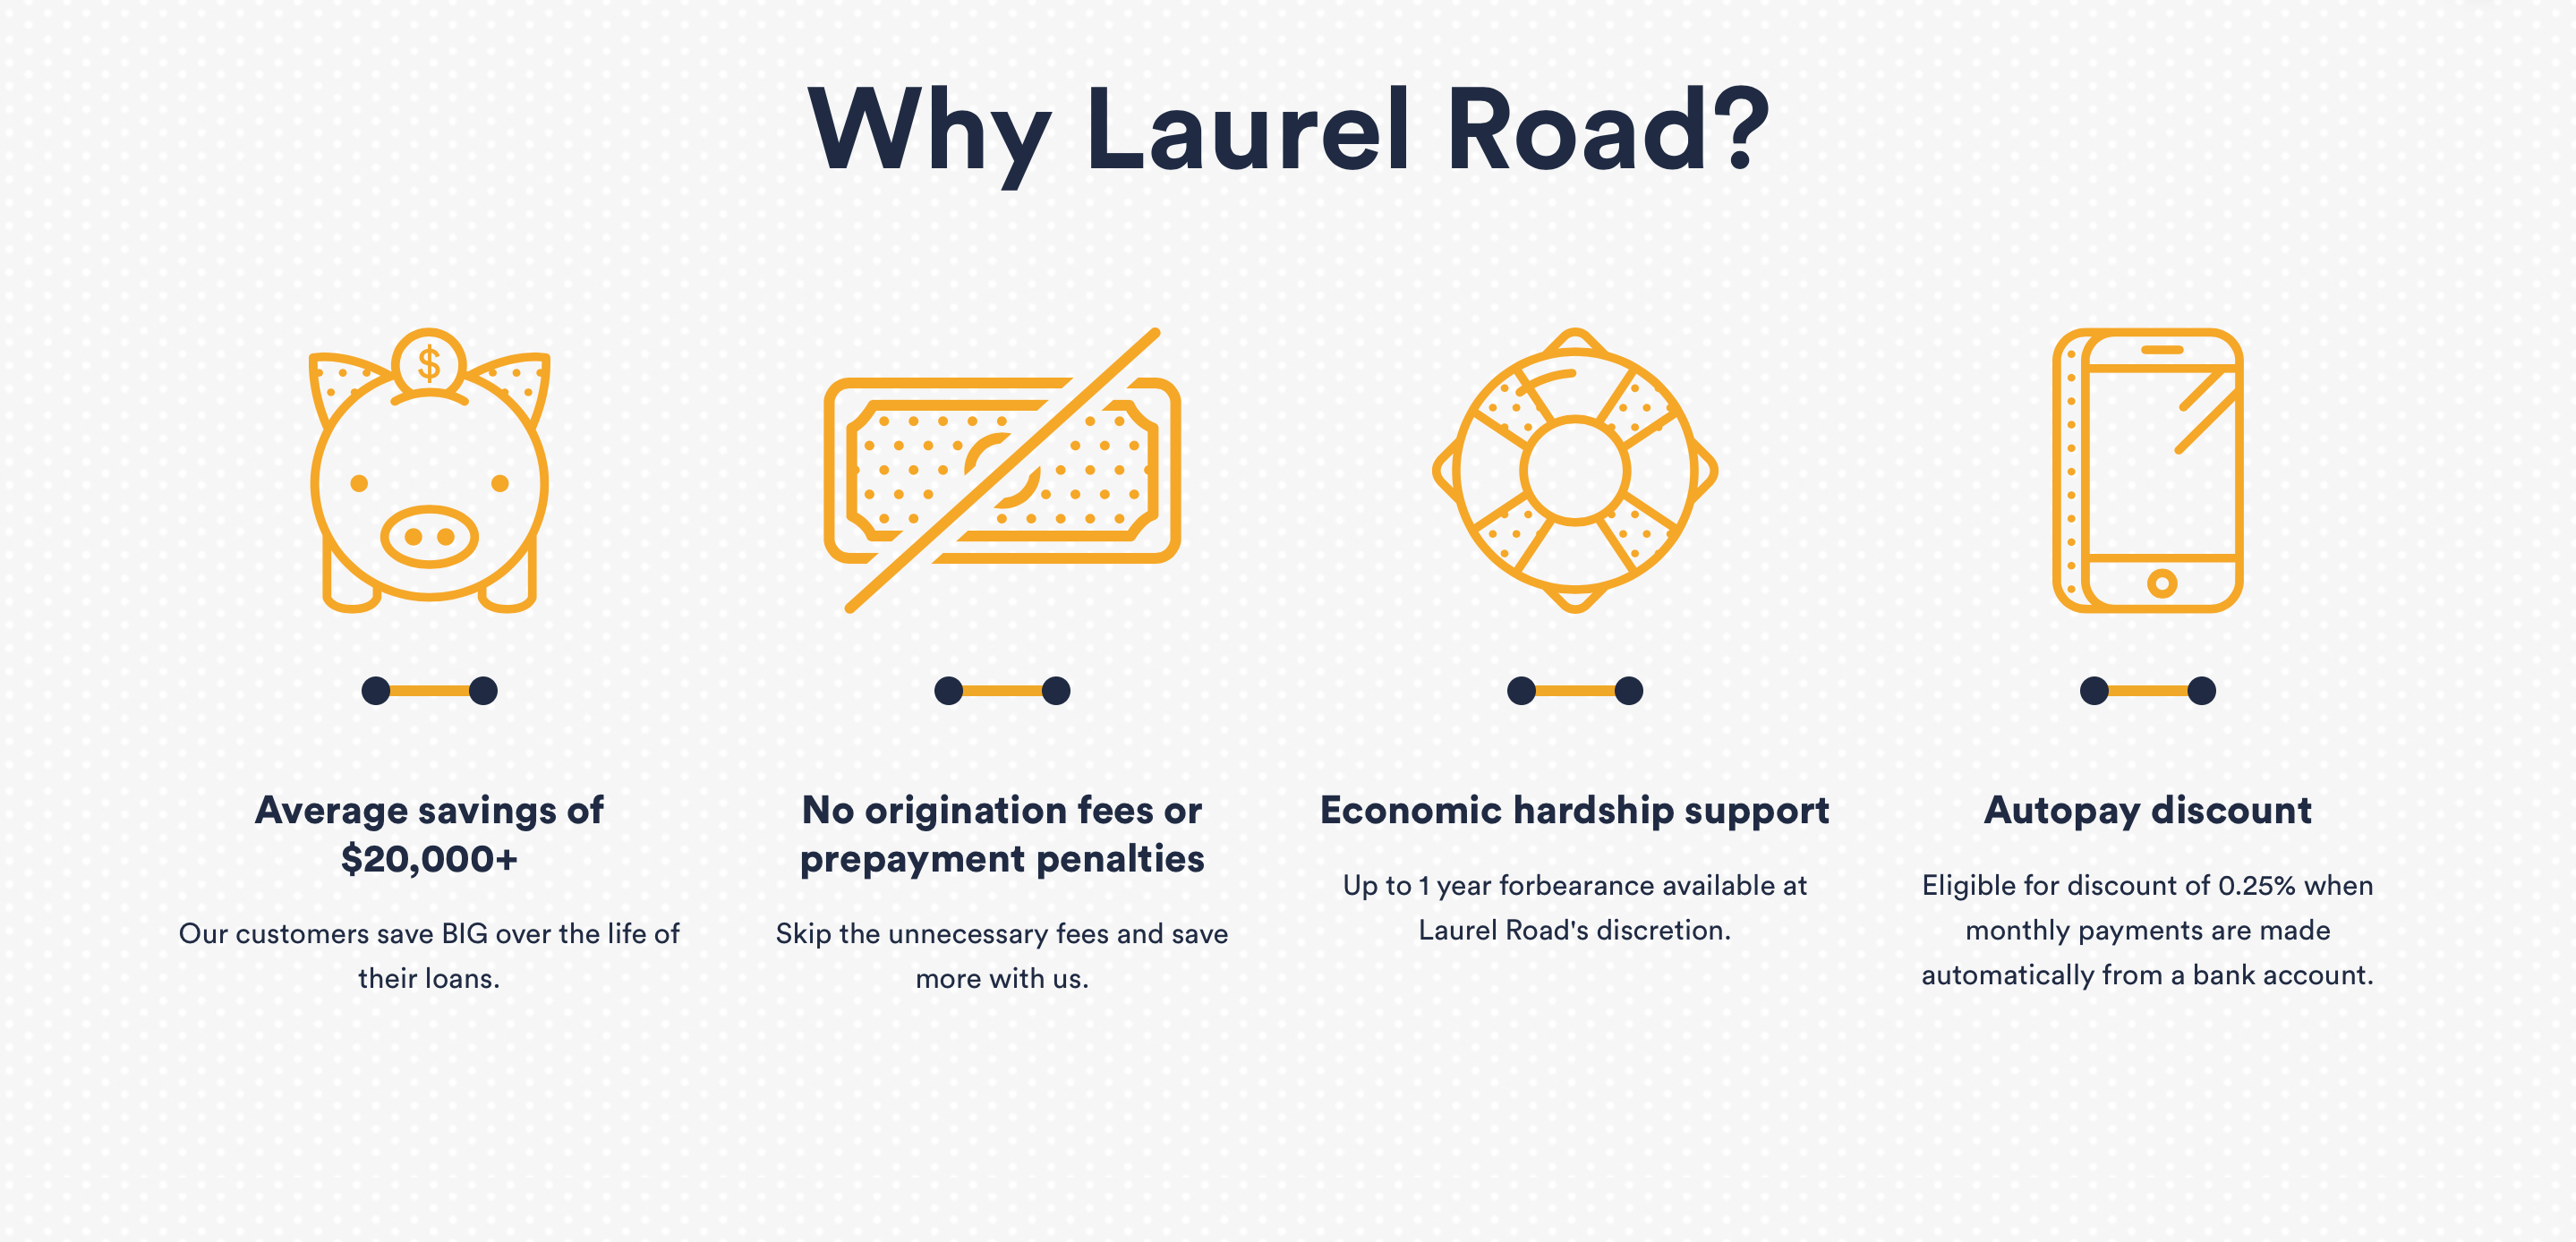 This image is used to help give users a better idea about the values and offerings of Laurel Road.